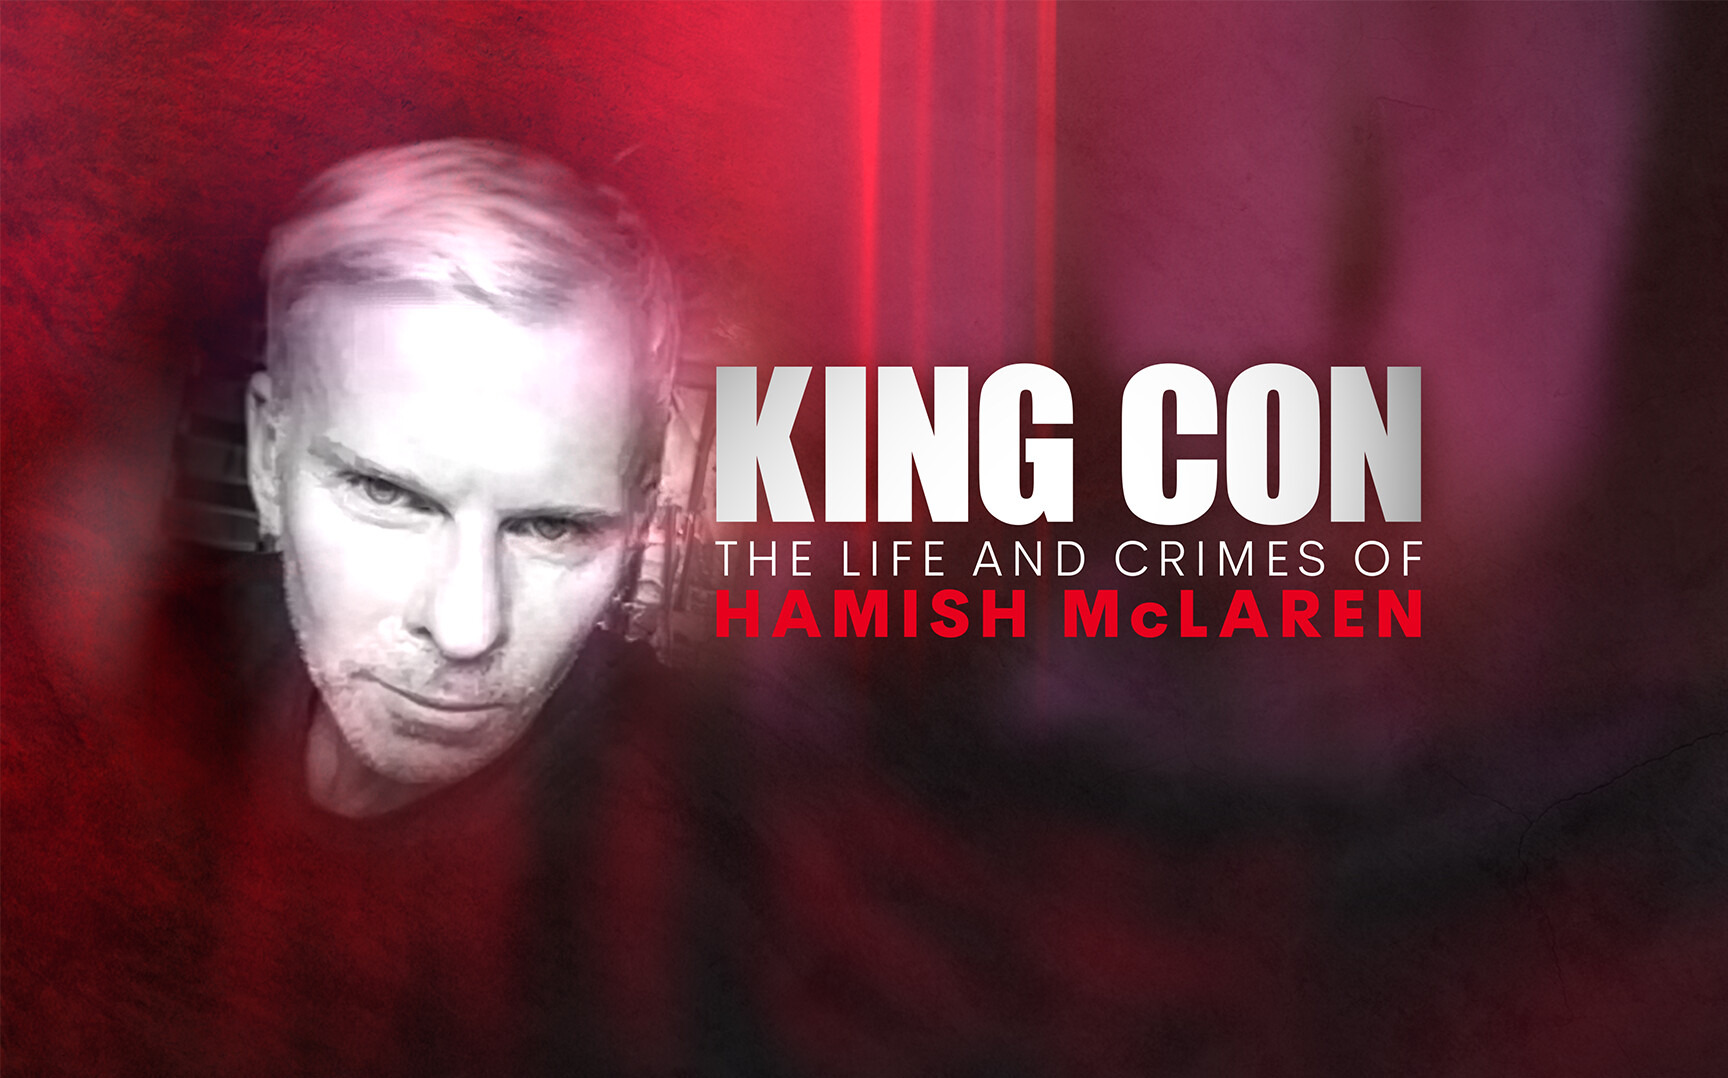 King Con: The Life and Crimes of Hamish McLaren